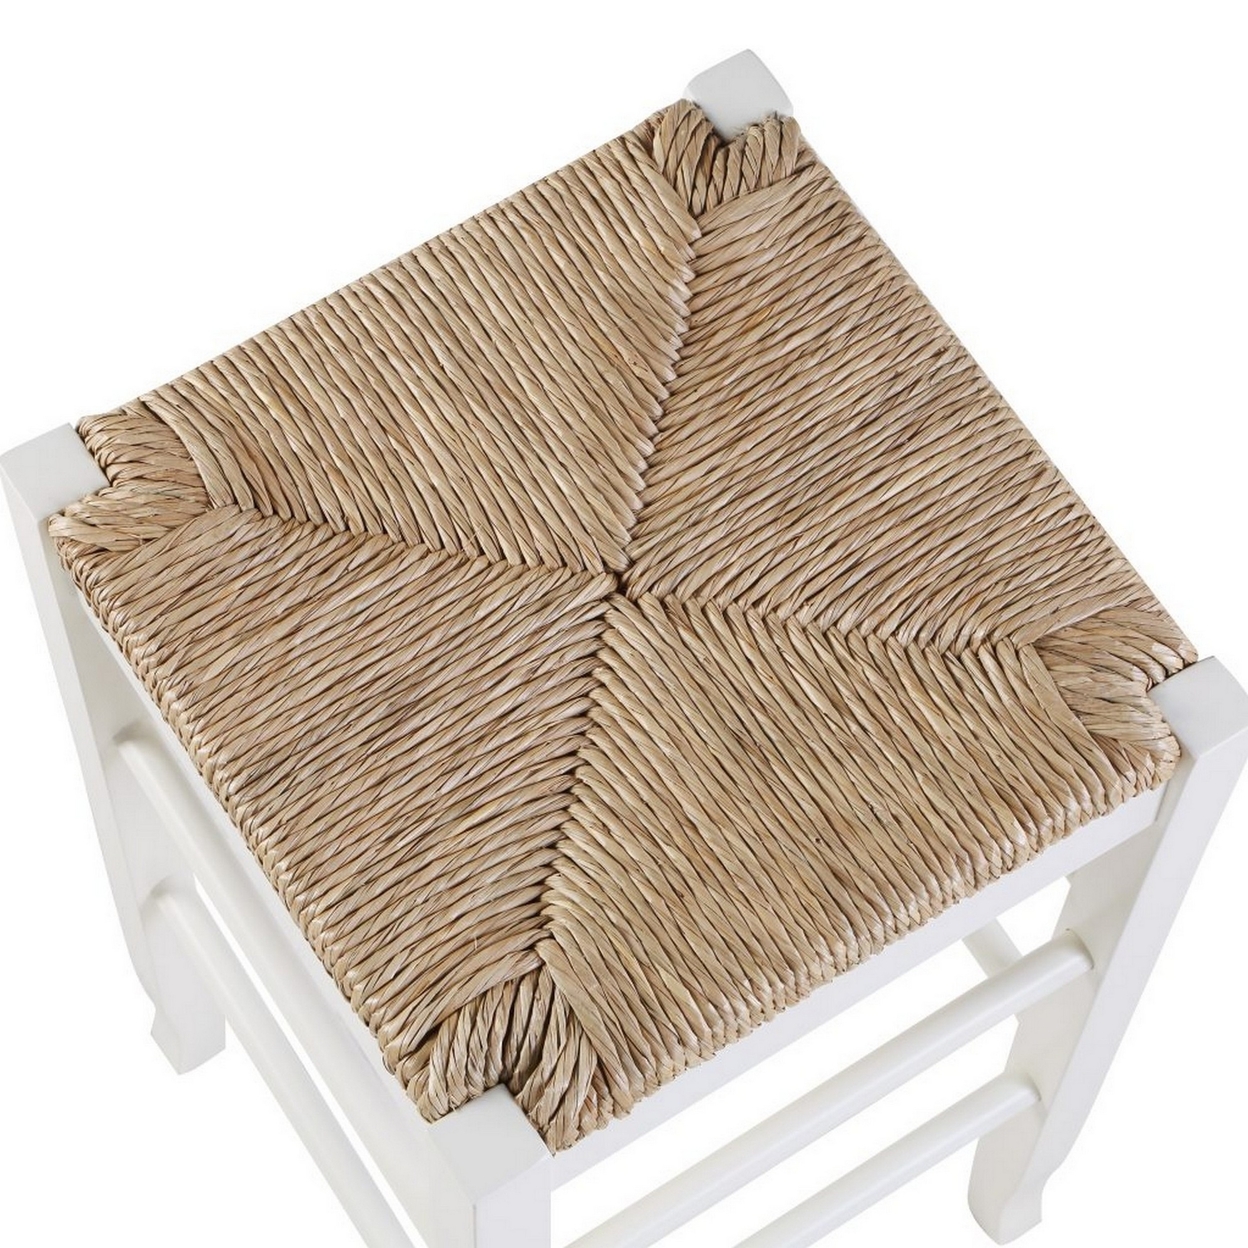 Square Wooden Frame Counter Stool With Hand Woven Rush, White And Brown- Saltoro Sherpi